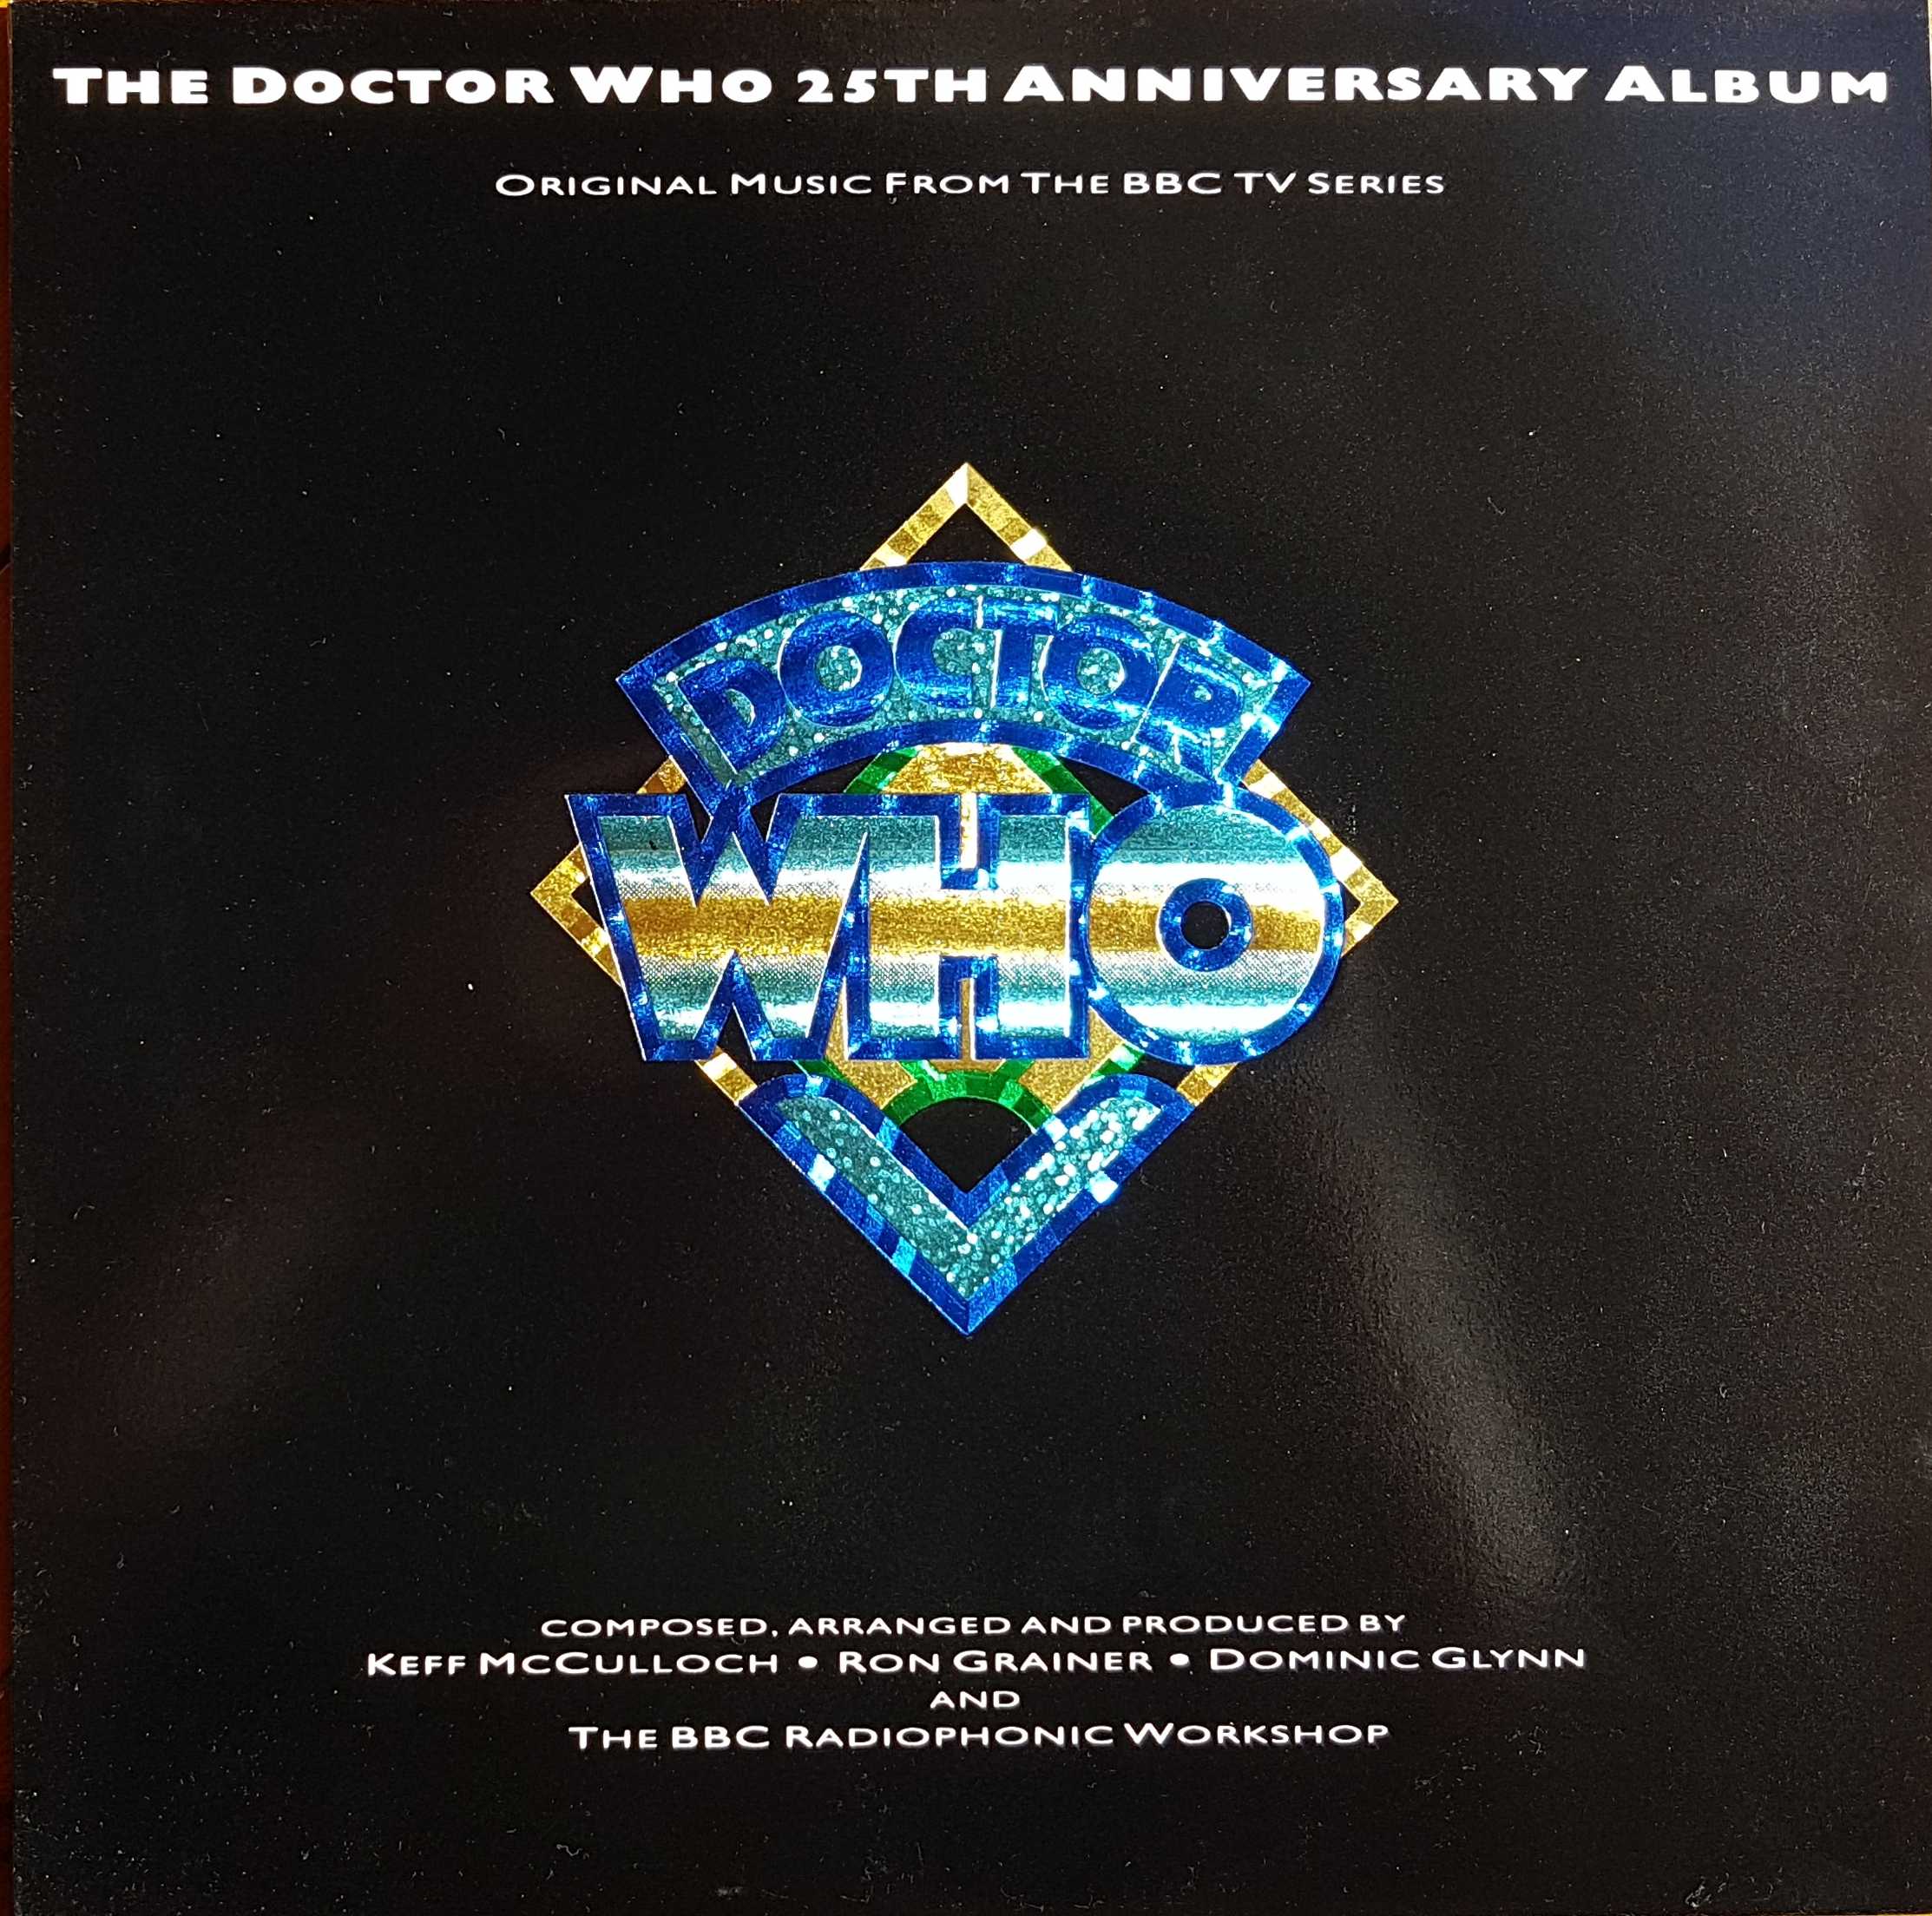 Picture of REB 707 Doctor Who - 25th anniversary album - Blue / Red / Yellow covers by artist Ron Grainer / Dominic Glynn / Keff McCulloch from the BBC albums - Records and Tapes library